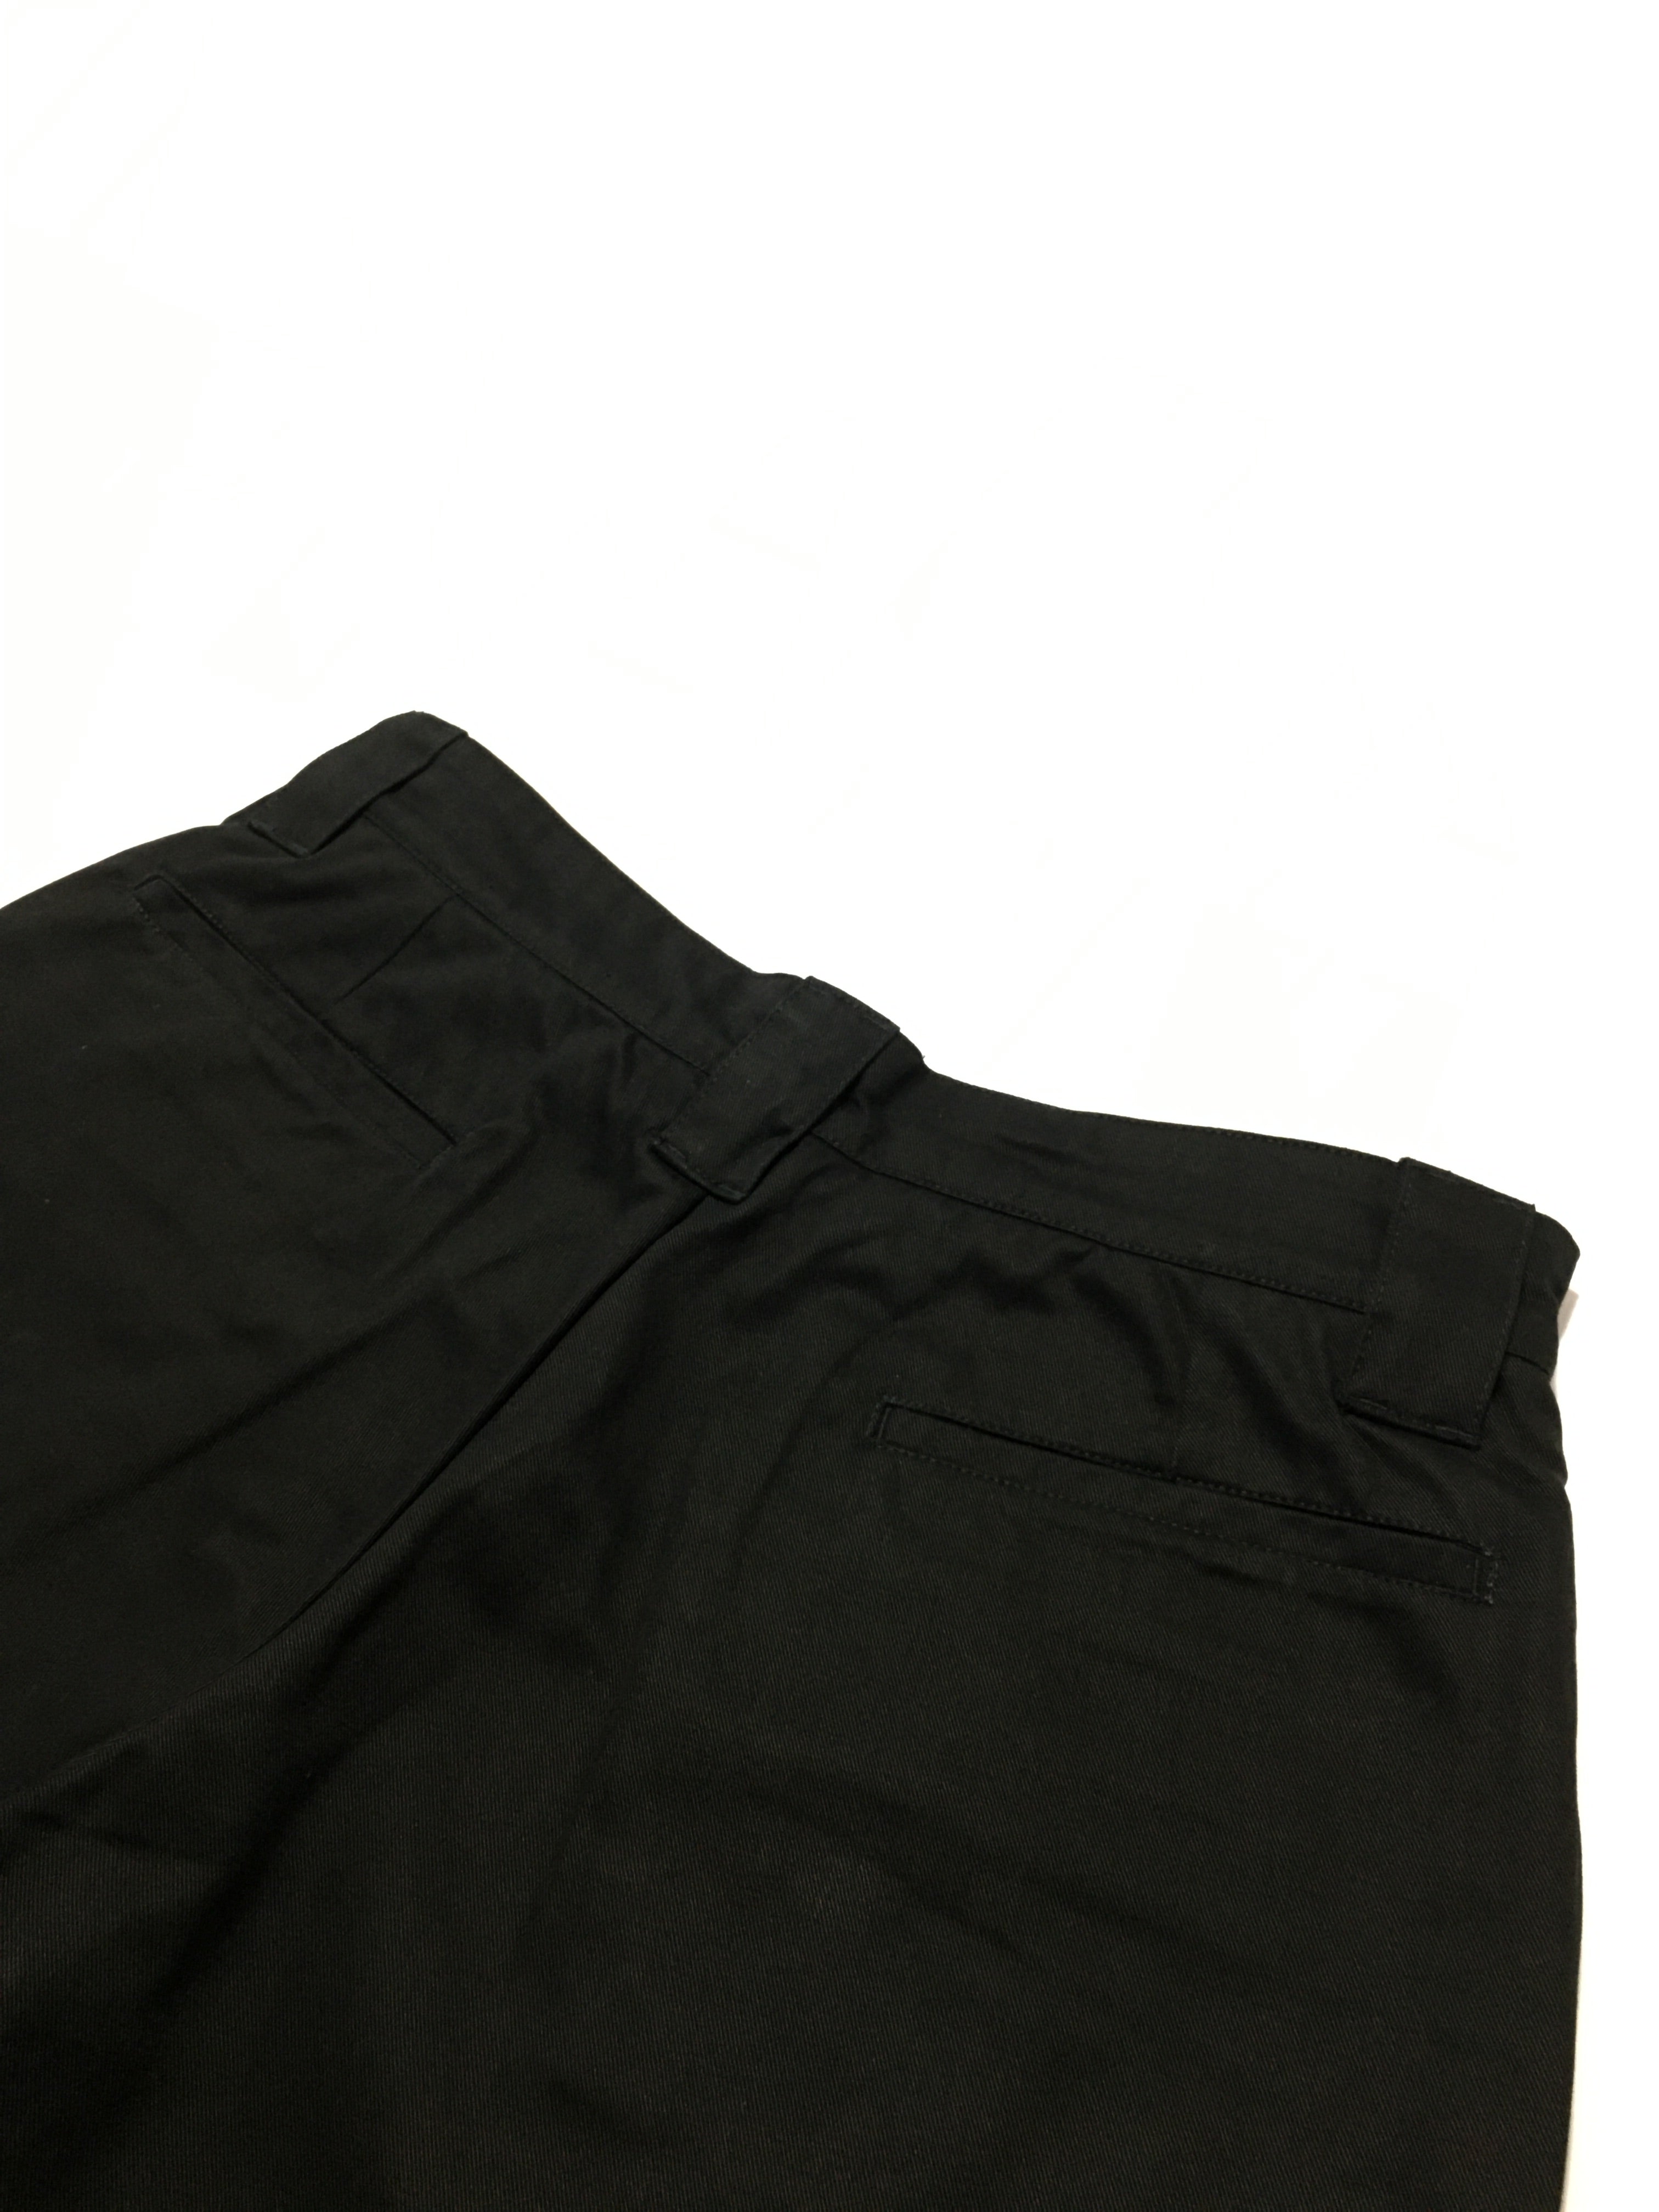 TAPERED TROUSER